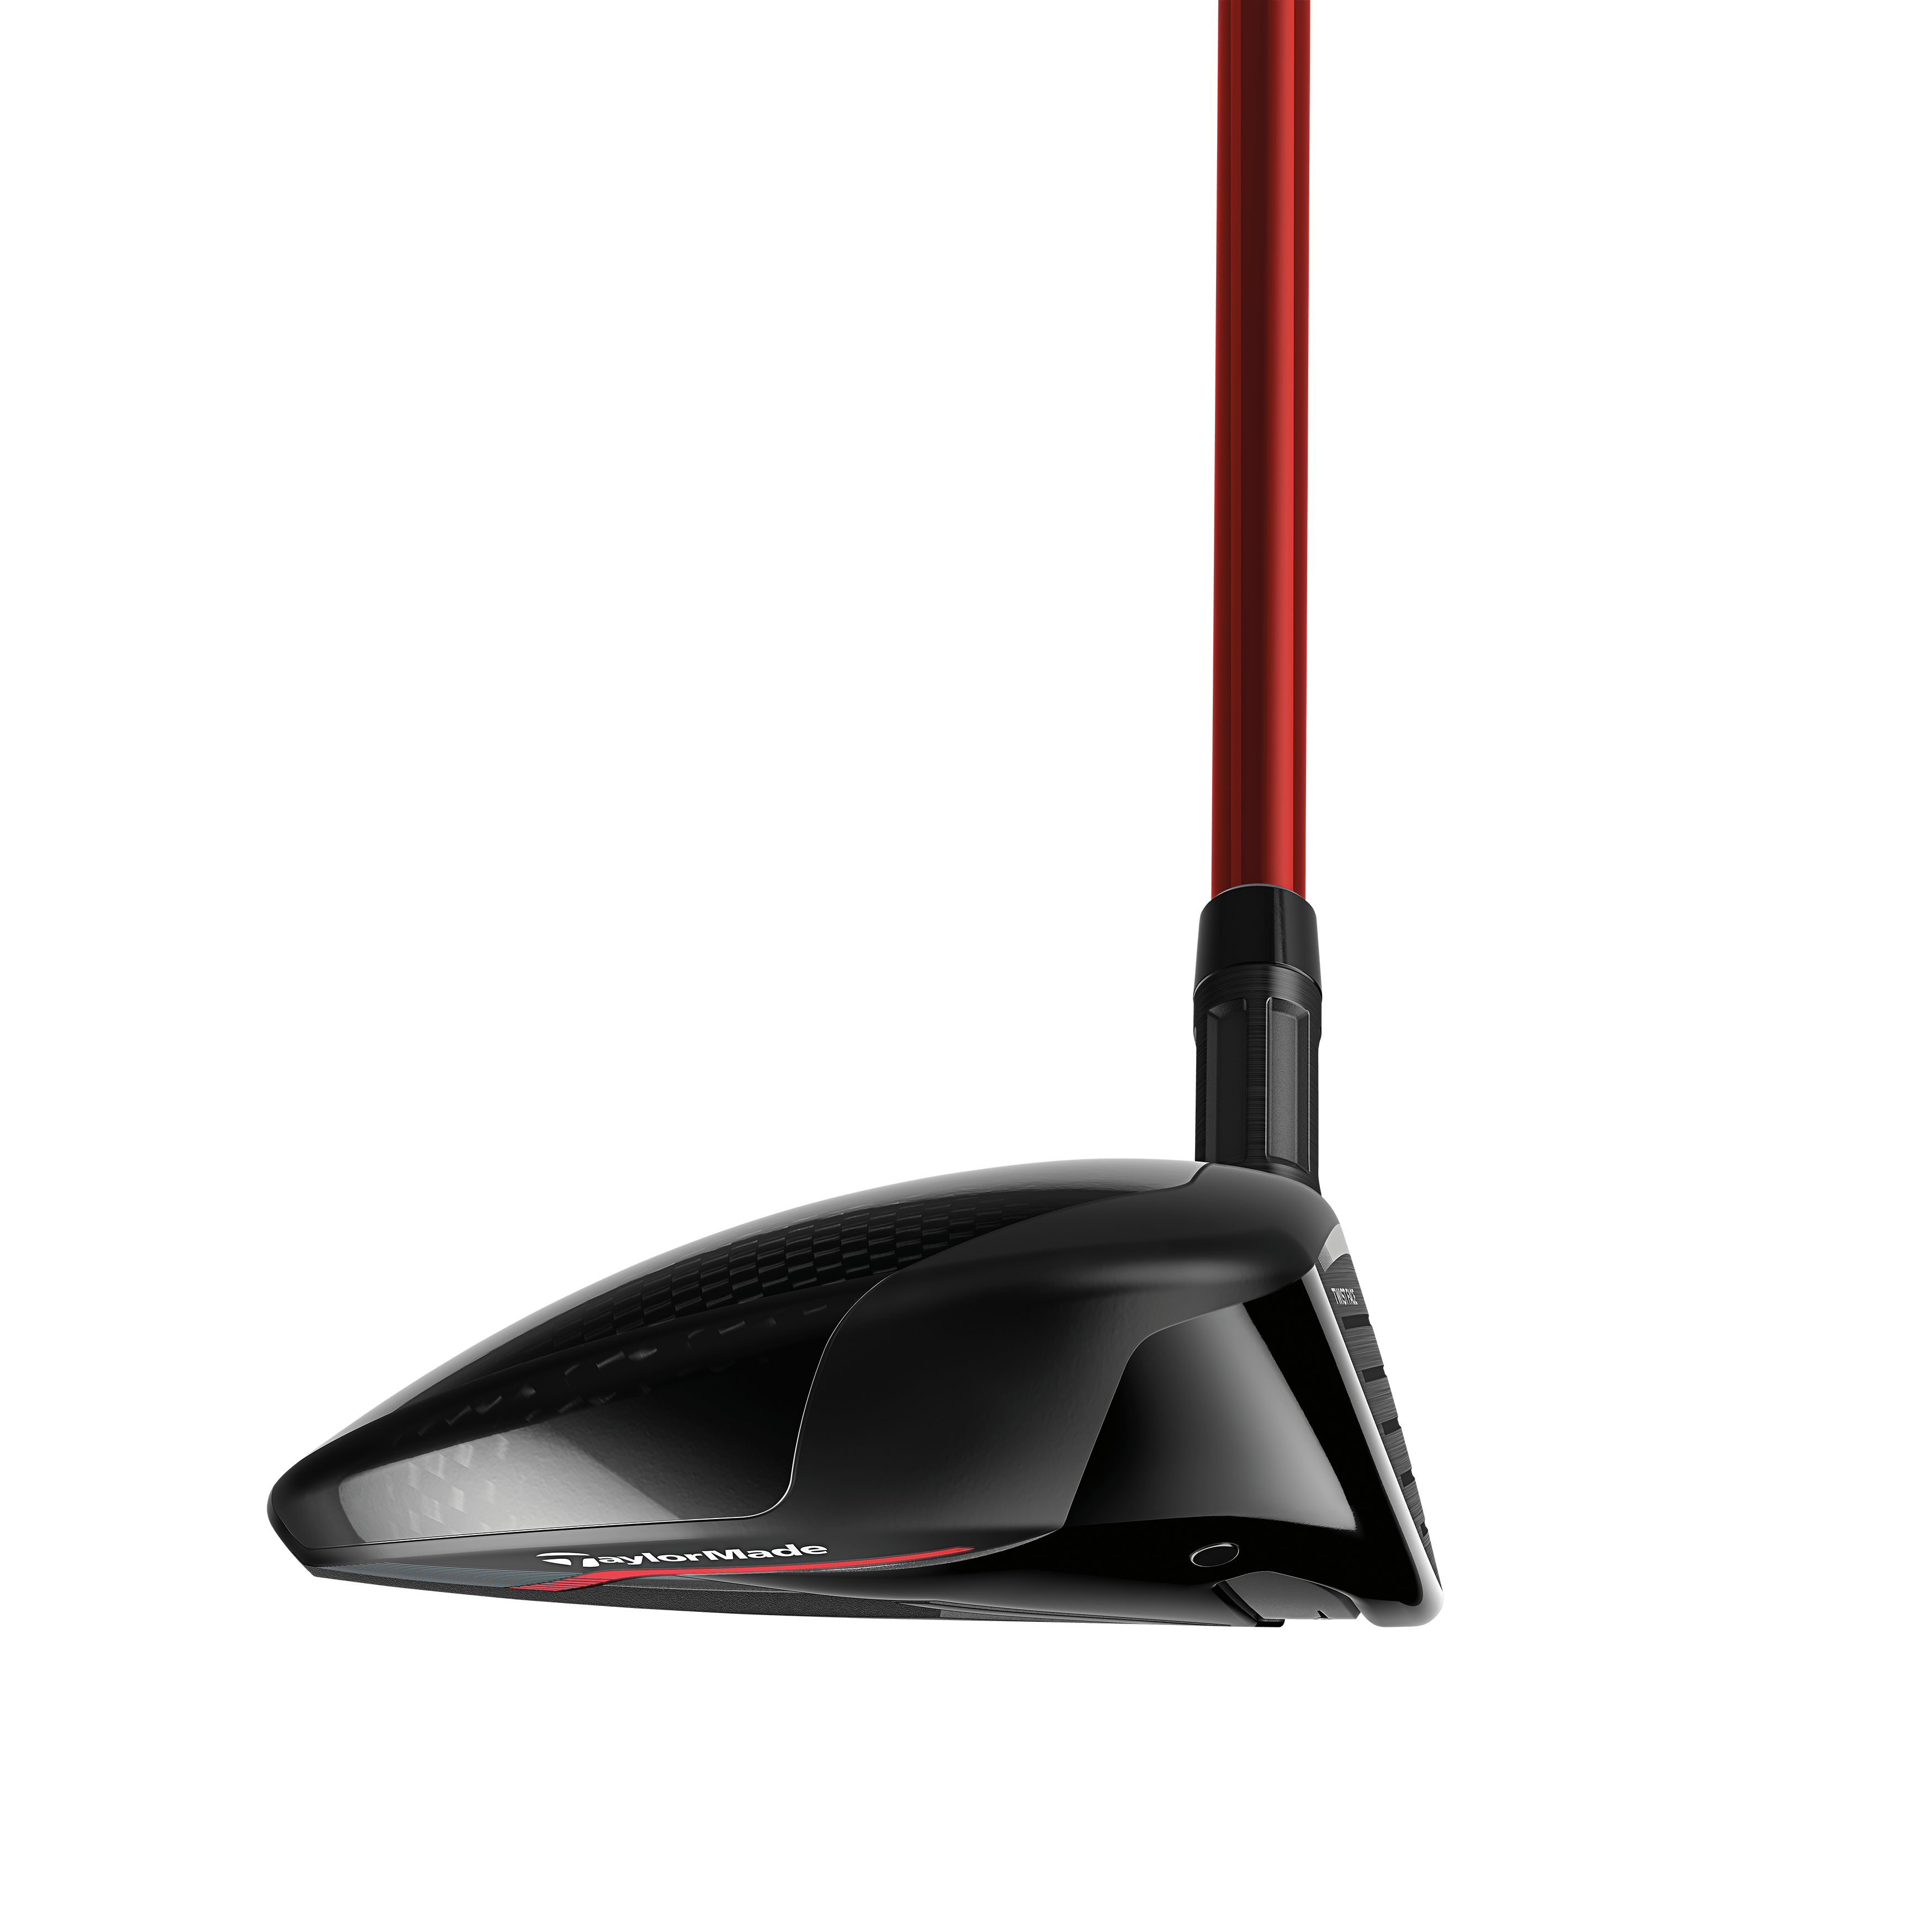 TaylorMade Stealth HD 2 Fairway Wood · Right Handed · Regular · 5W